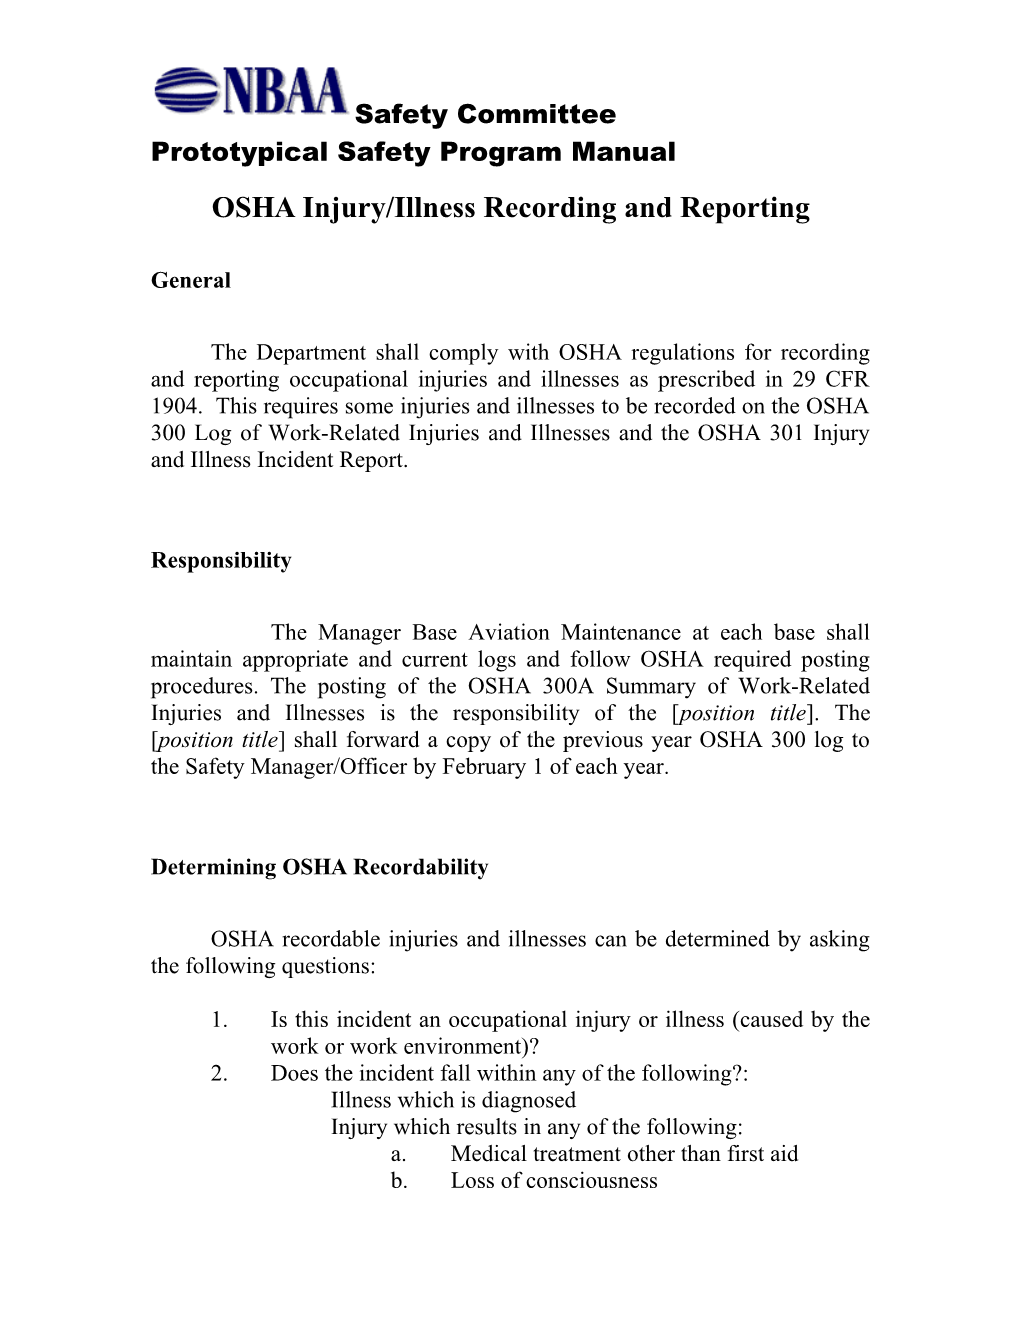 1 Section V - OSHA Injury/Illness Recording and Reporting s1